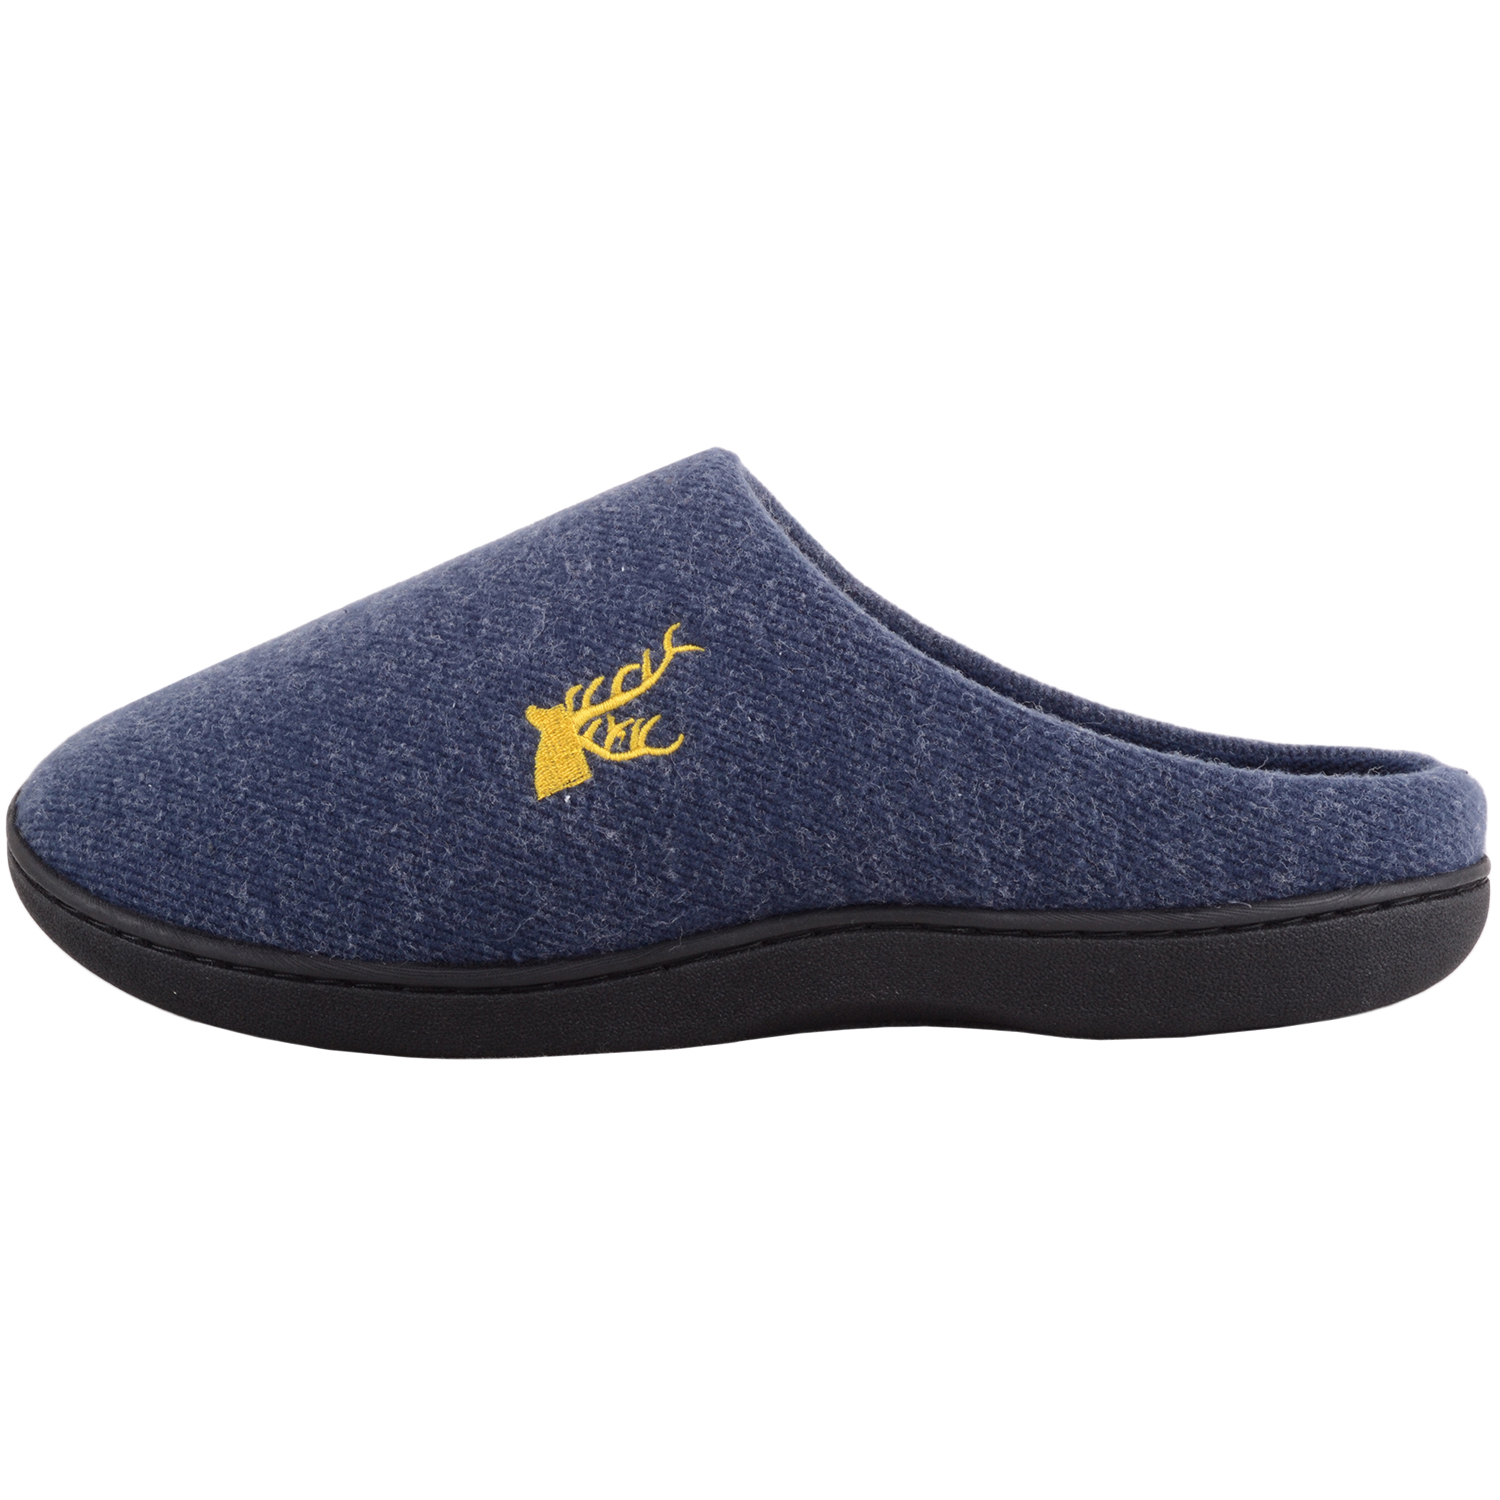 Mens Gents Lightweight Soft Stag Embroidered Memory Foam Mule Slippers